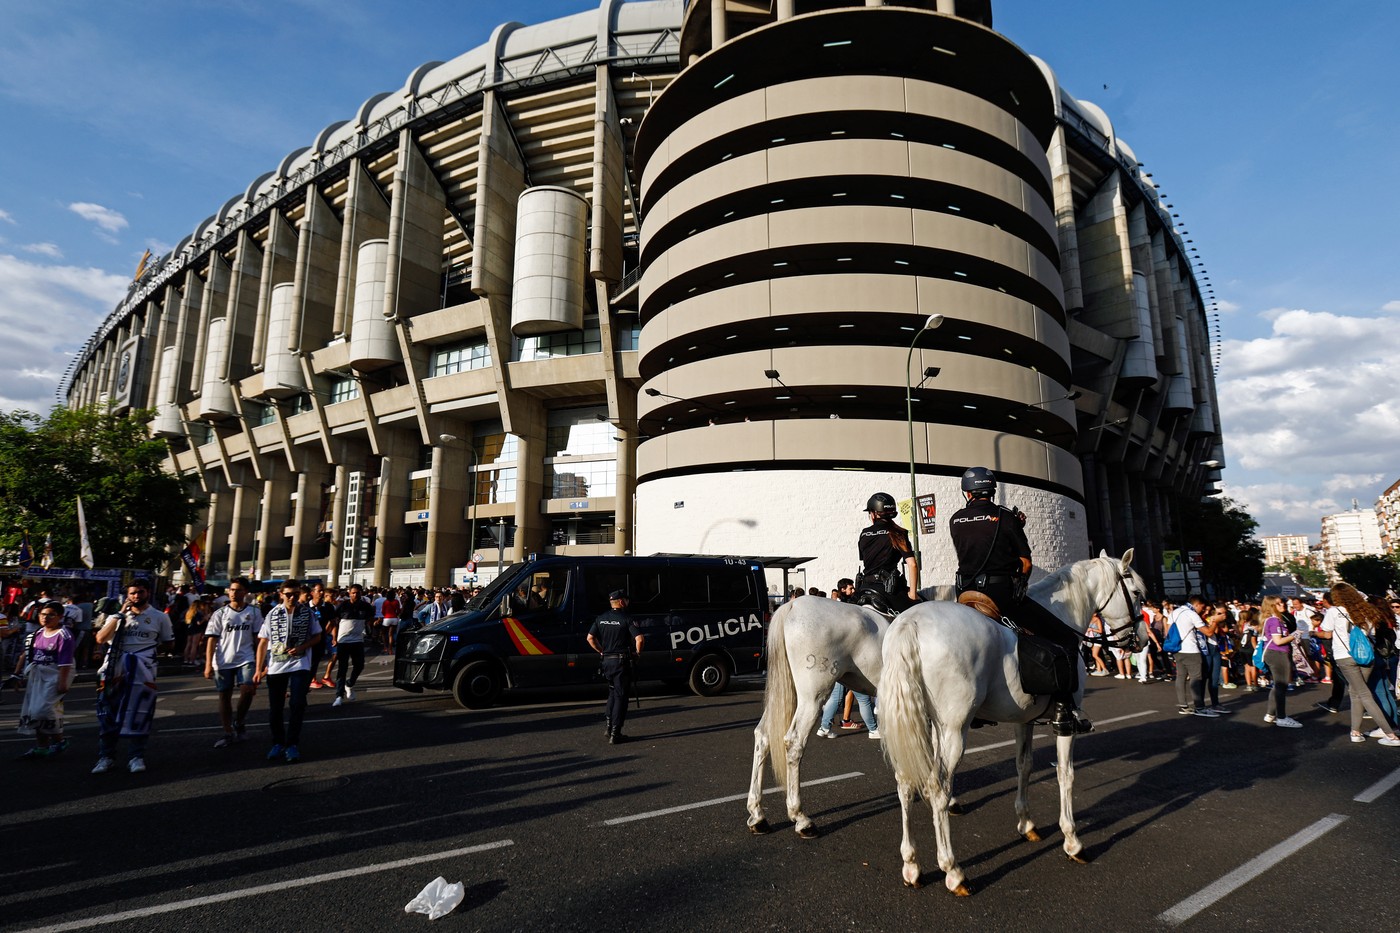 Horse mounted police patrol outside the Santiago Bernabeu stadium in Madrid on June 3, 2017 before the UEFA Champions League football match final Juventus vs Real Madrid CF held at the National Stadium of Wales in Cardiff.,Image: 334755608, License: Rights-managed, Restrictions: , Model Release: no, Credit line: OSCAR DEL POZO / AFP / Profimedia